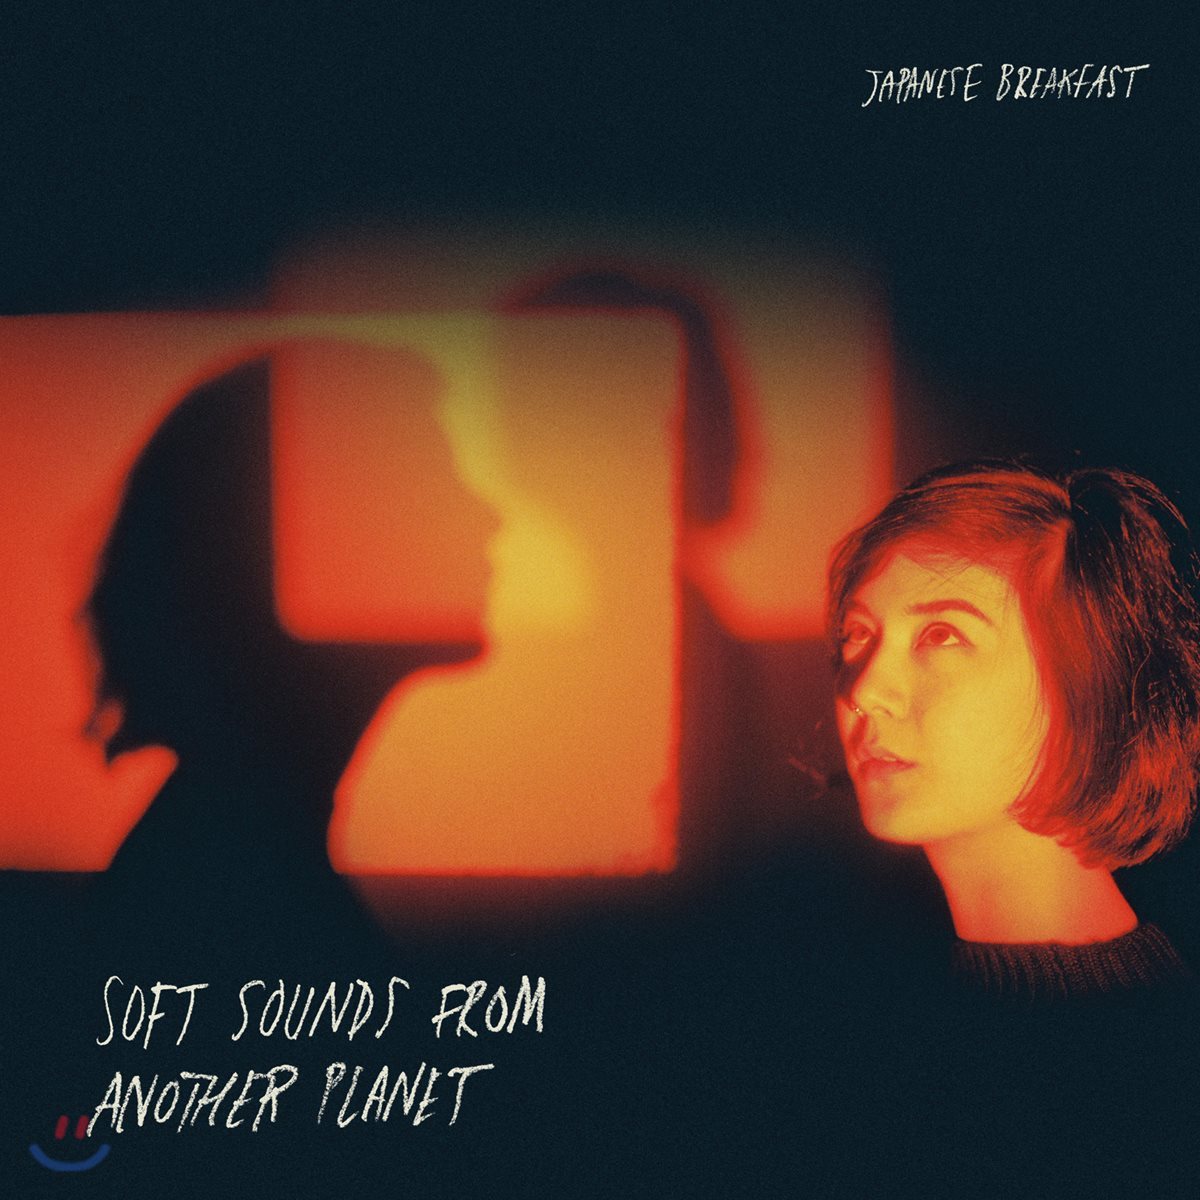 Japanese Breakfast (재패니즈 브렉퍼스트) - Soft Sounds from Another Planet